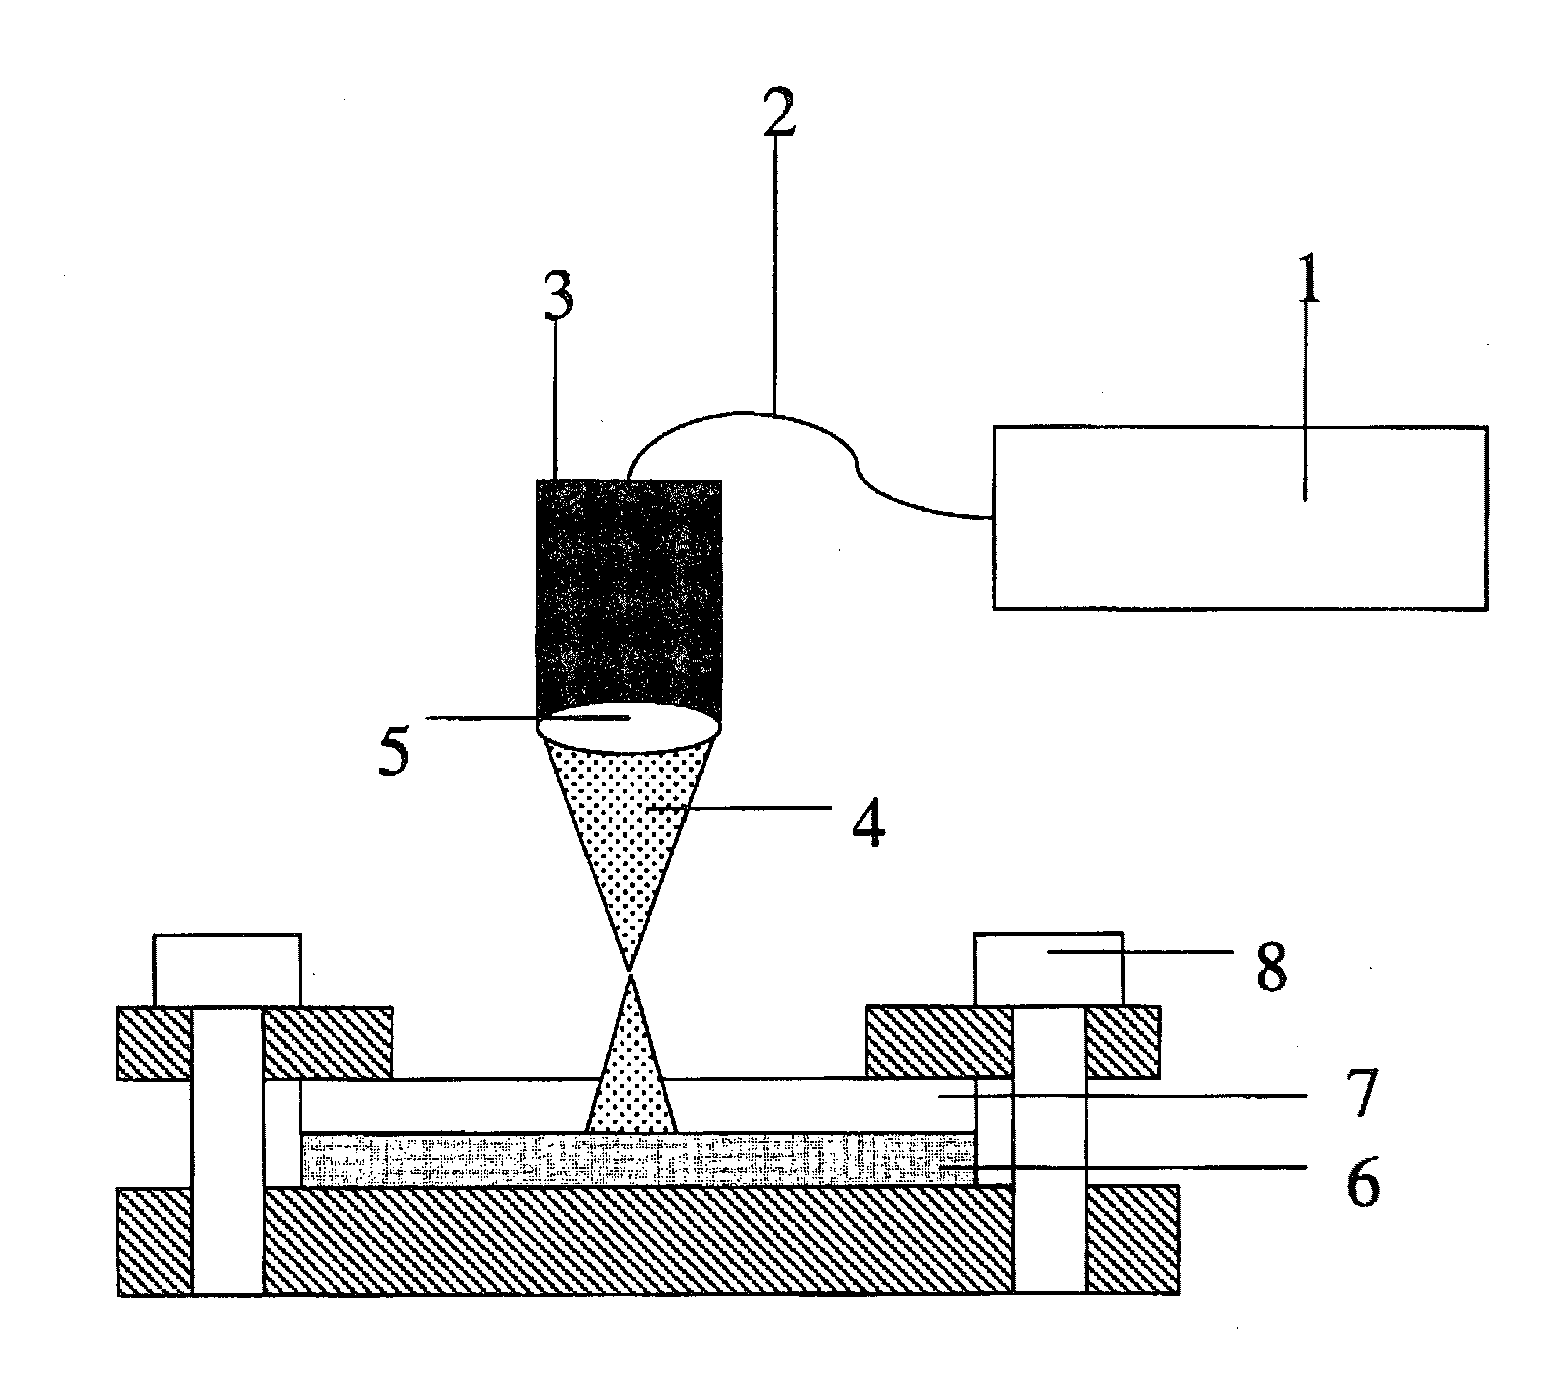 Method for metal-resin joining and a metal-resin composite, a method for glass-resin joining and a glass-resin composite, and a method for ceramic-resin joining and a ceramic-resin composite